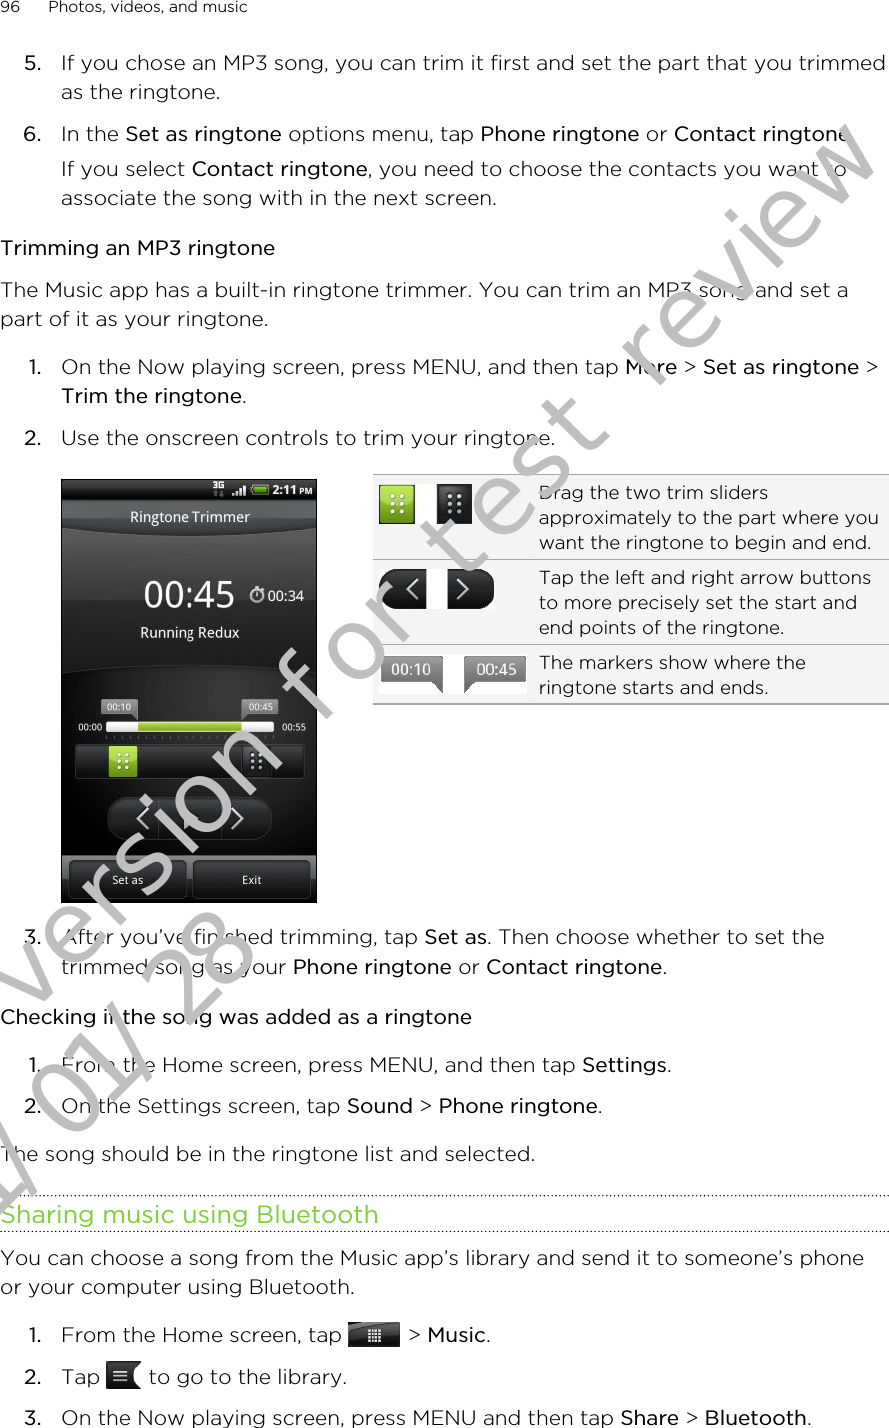 5. If you chose an MP3 song, you can trim it first and set the part that you trimmedas the ringtone.6. In the Set as ringtone options menu, tap Phone ringtone or Contact ringtone.If you select Contact ringtone, you need to choose the contacts you want toassociate the song with in the next screen.Trimming an MP3 ringtoneThe Music app has a built-in ringtone trimmer. You can trim an MP3 song and set apart of it as your ringtone.1. On the Now playing screen, press MENU, and then tap More &gt; Set as ringtone &gt;Trim the ringtone.2. Use the onscreen controls to trim your ringtone.Drag the two trim slidersapproximately to the part where youwant the ringtone to begin and end.Tap the left and right arrow buttonsto more precisely set the start andend points of the ringtone.The markers show where theringtone starts and ends.3. After you’ve finished trimming, tap Set as. Then choose whether to set thetrimmed song as your Phone ringtone or Contact ringtone.Checking if the song was added as a ringtone1. From the Home screen, press MENU, and then tap Settings.2. On the Settings screen, tap Sound &gt; Phone ringtone.The song should be in the ringtone list and selected.Sharing music using BluetoothYou can choose a song from the Music app’s library and send it to someone’s phoneor your computer using Bluetooth.1. From the Home screen, tap   &gt; Music.2. Tap   to go to the library.3. On the Now playing screen, press MENU and then tap Share &gt; Bluetooth.96 Photos, videos, and musicDraft version for test review 2011/01/28 